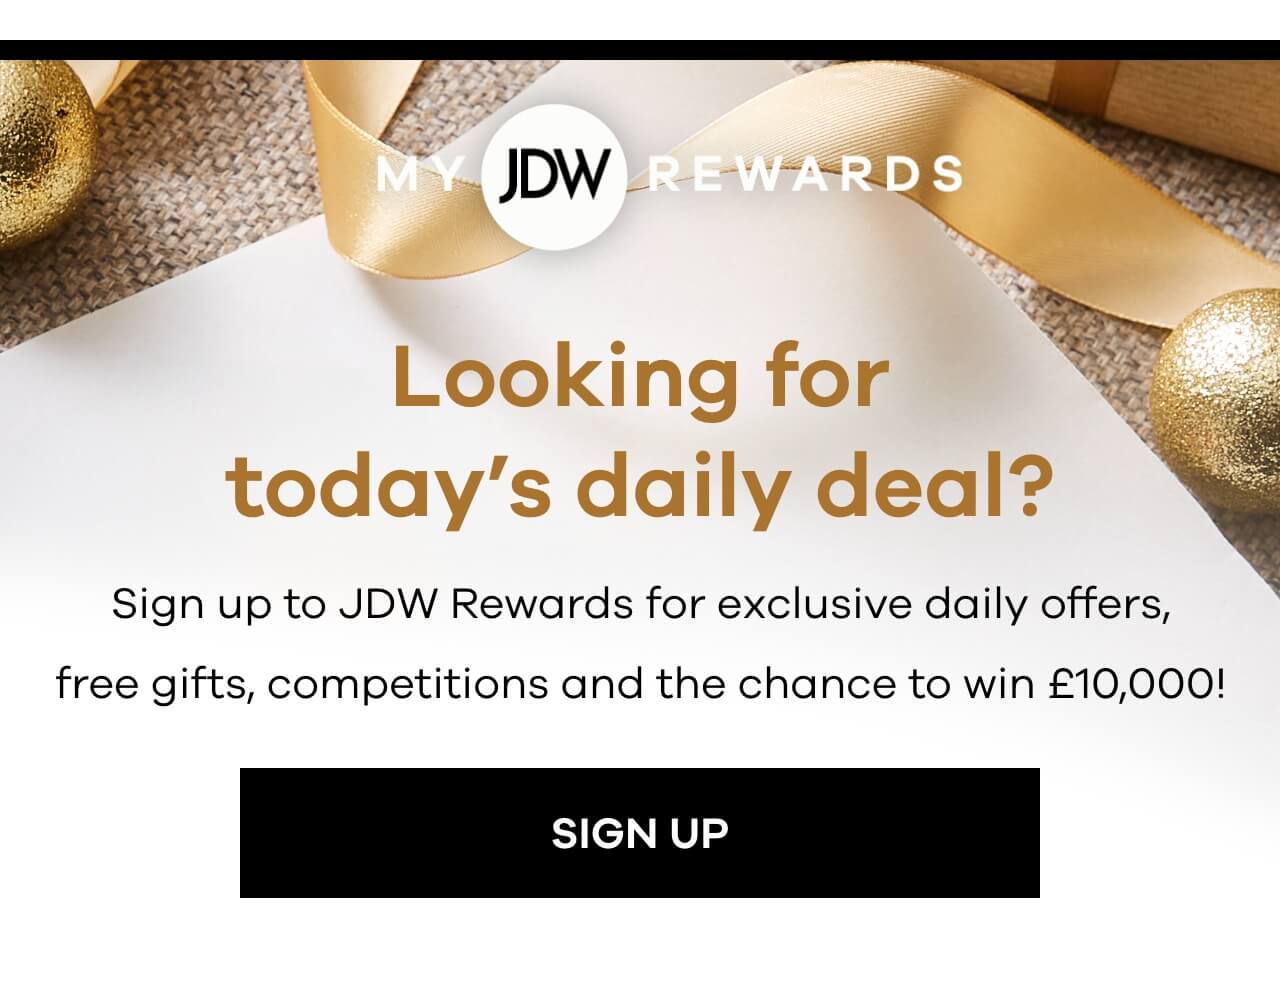 JDW Rewards. Looking for todays daily deal? Sign up the JDW Rewards to receive our emails for exclusive daily offers, free gifts and competitions. Sign up